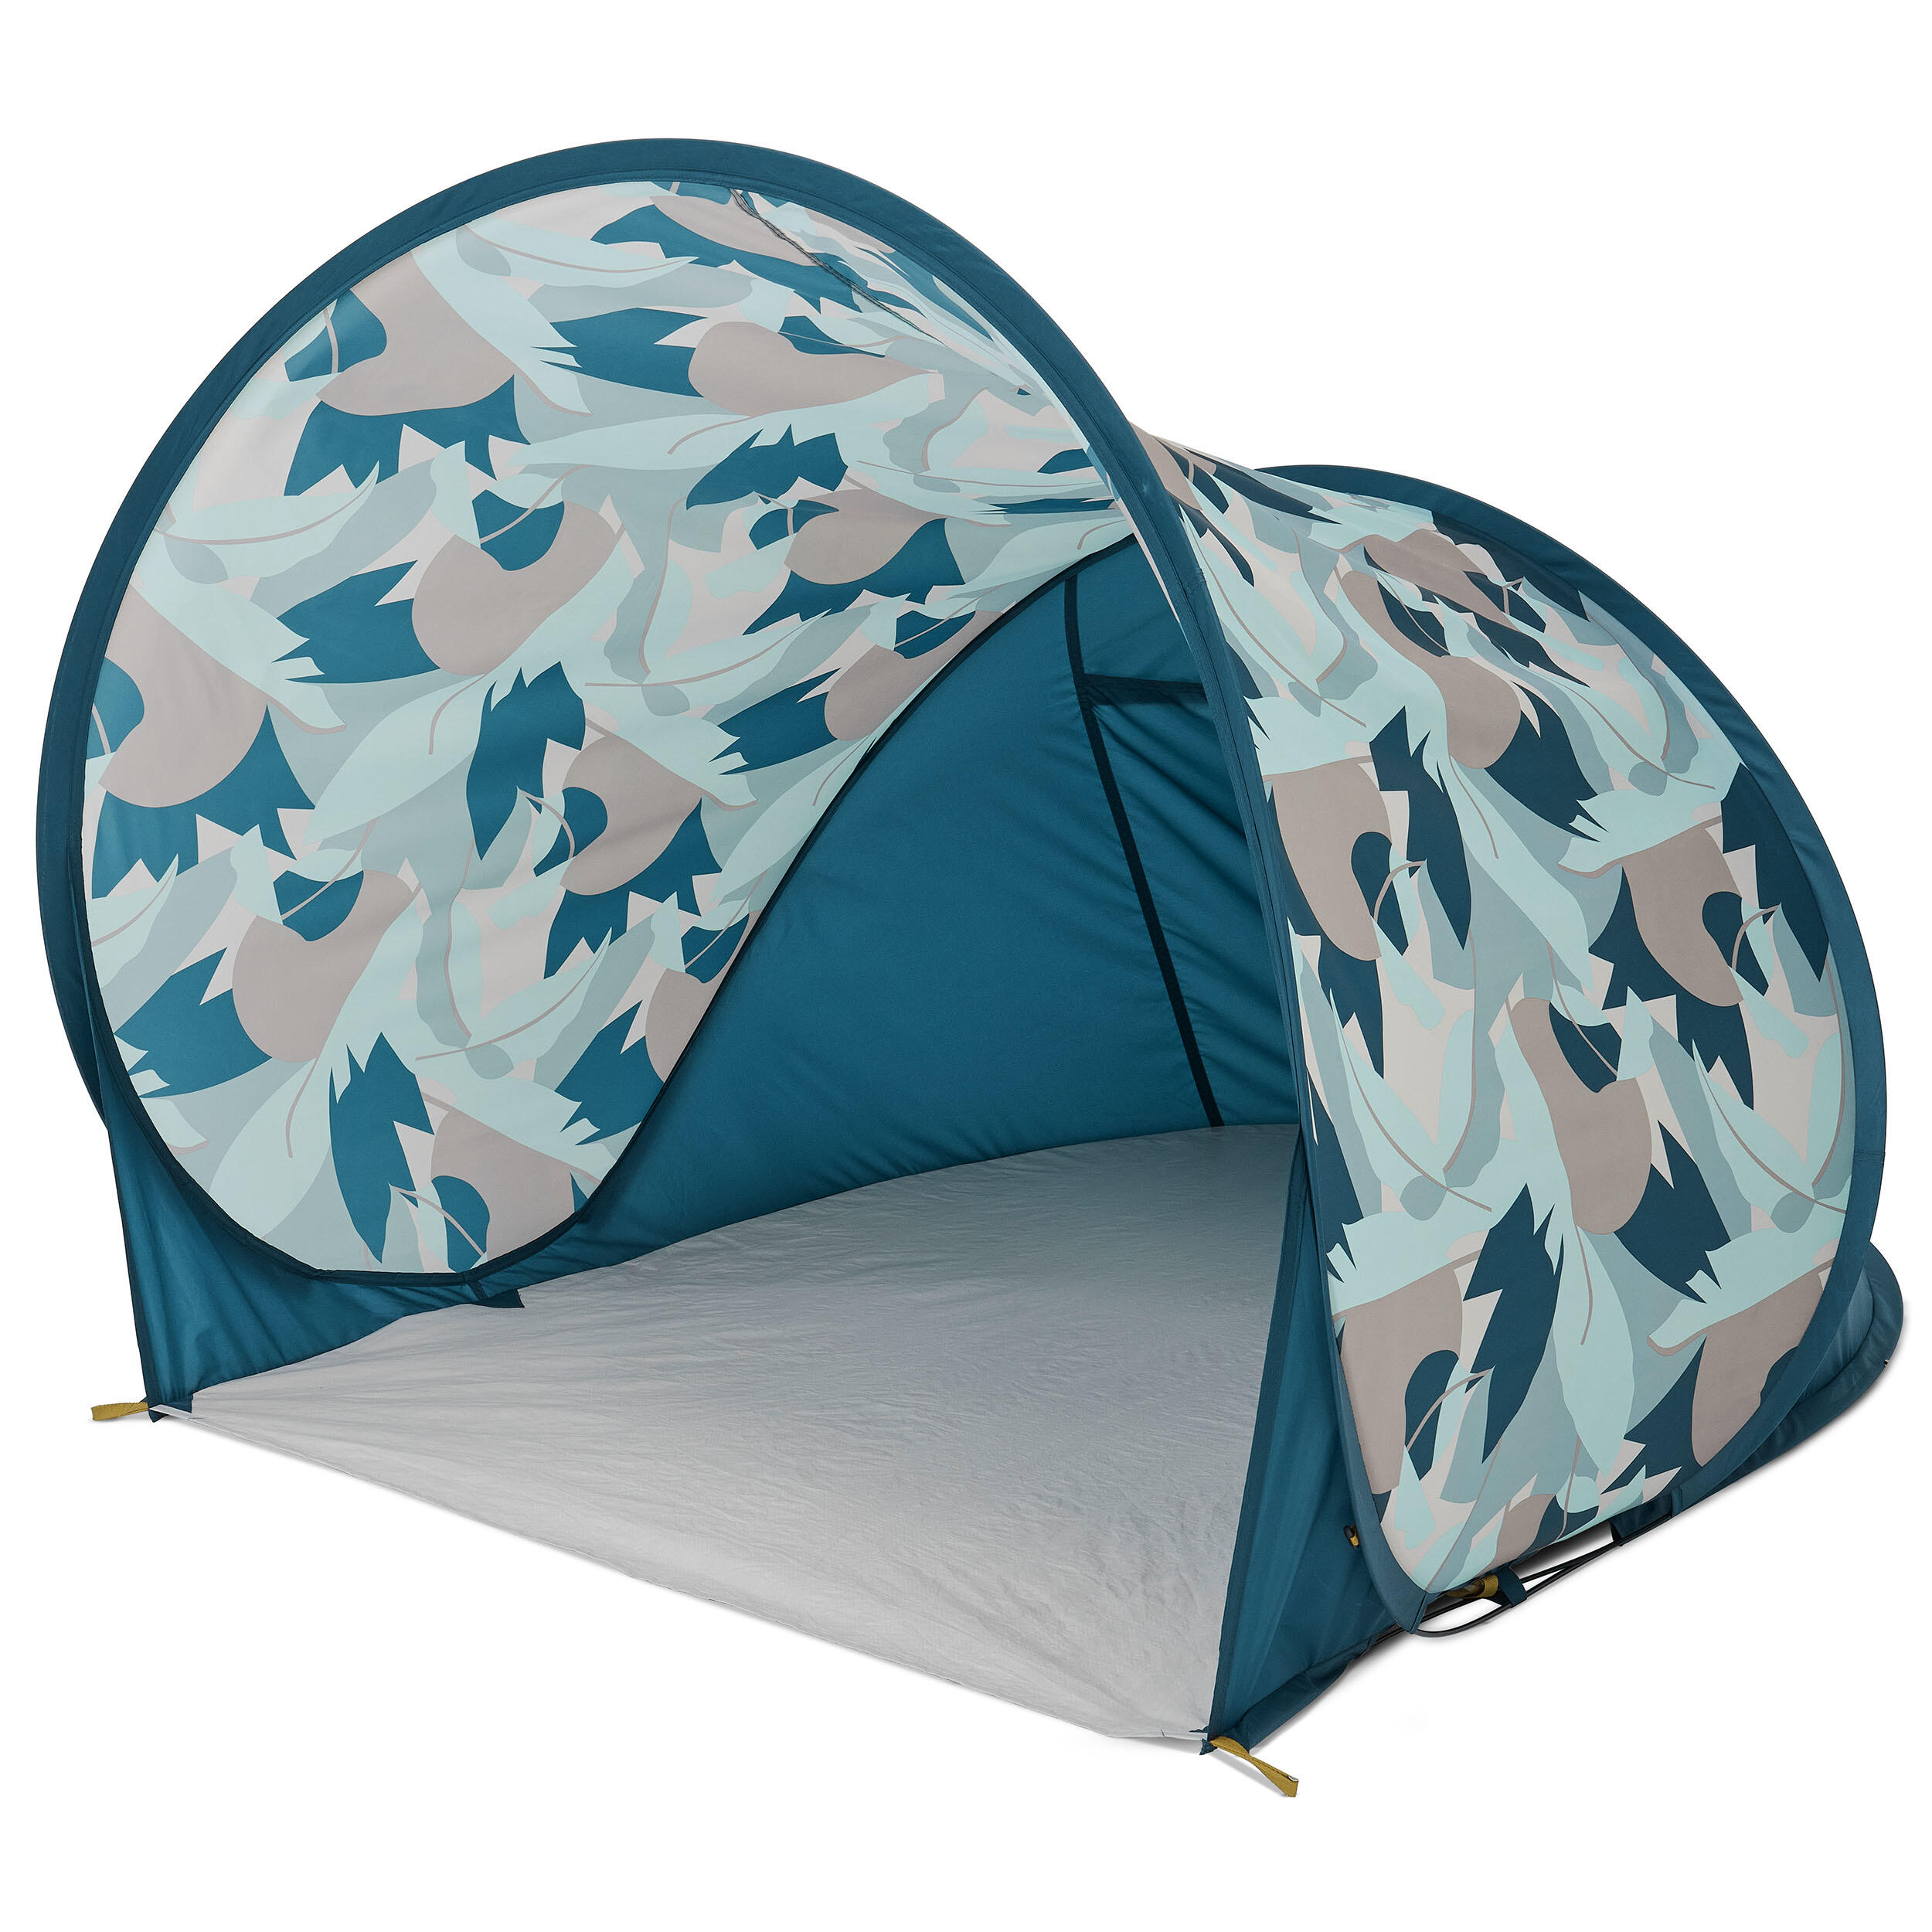 QUECHUA Instant Camping Shelter - 1 adult or 2 kids - 2 Seconds 1P